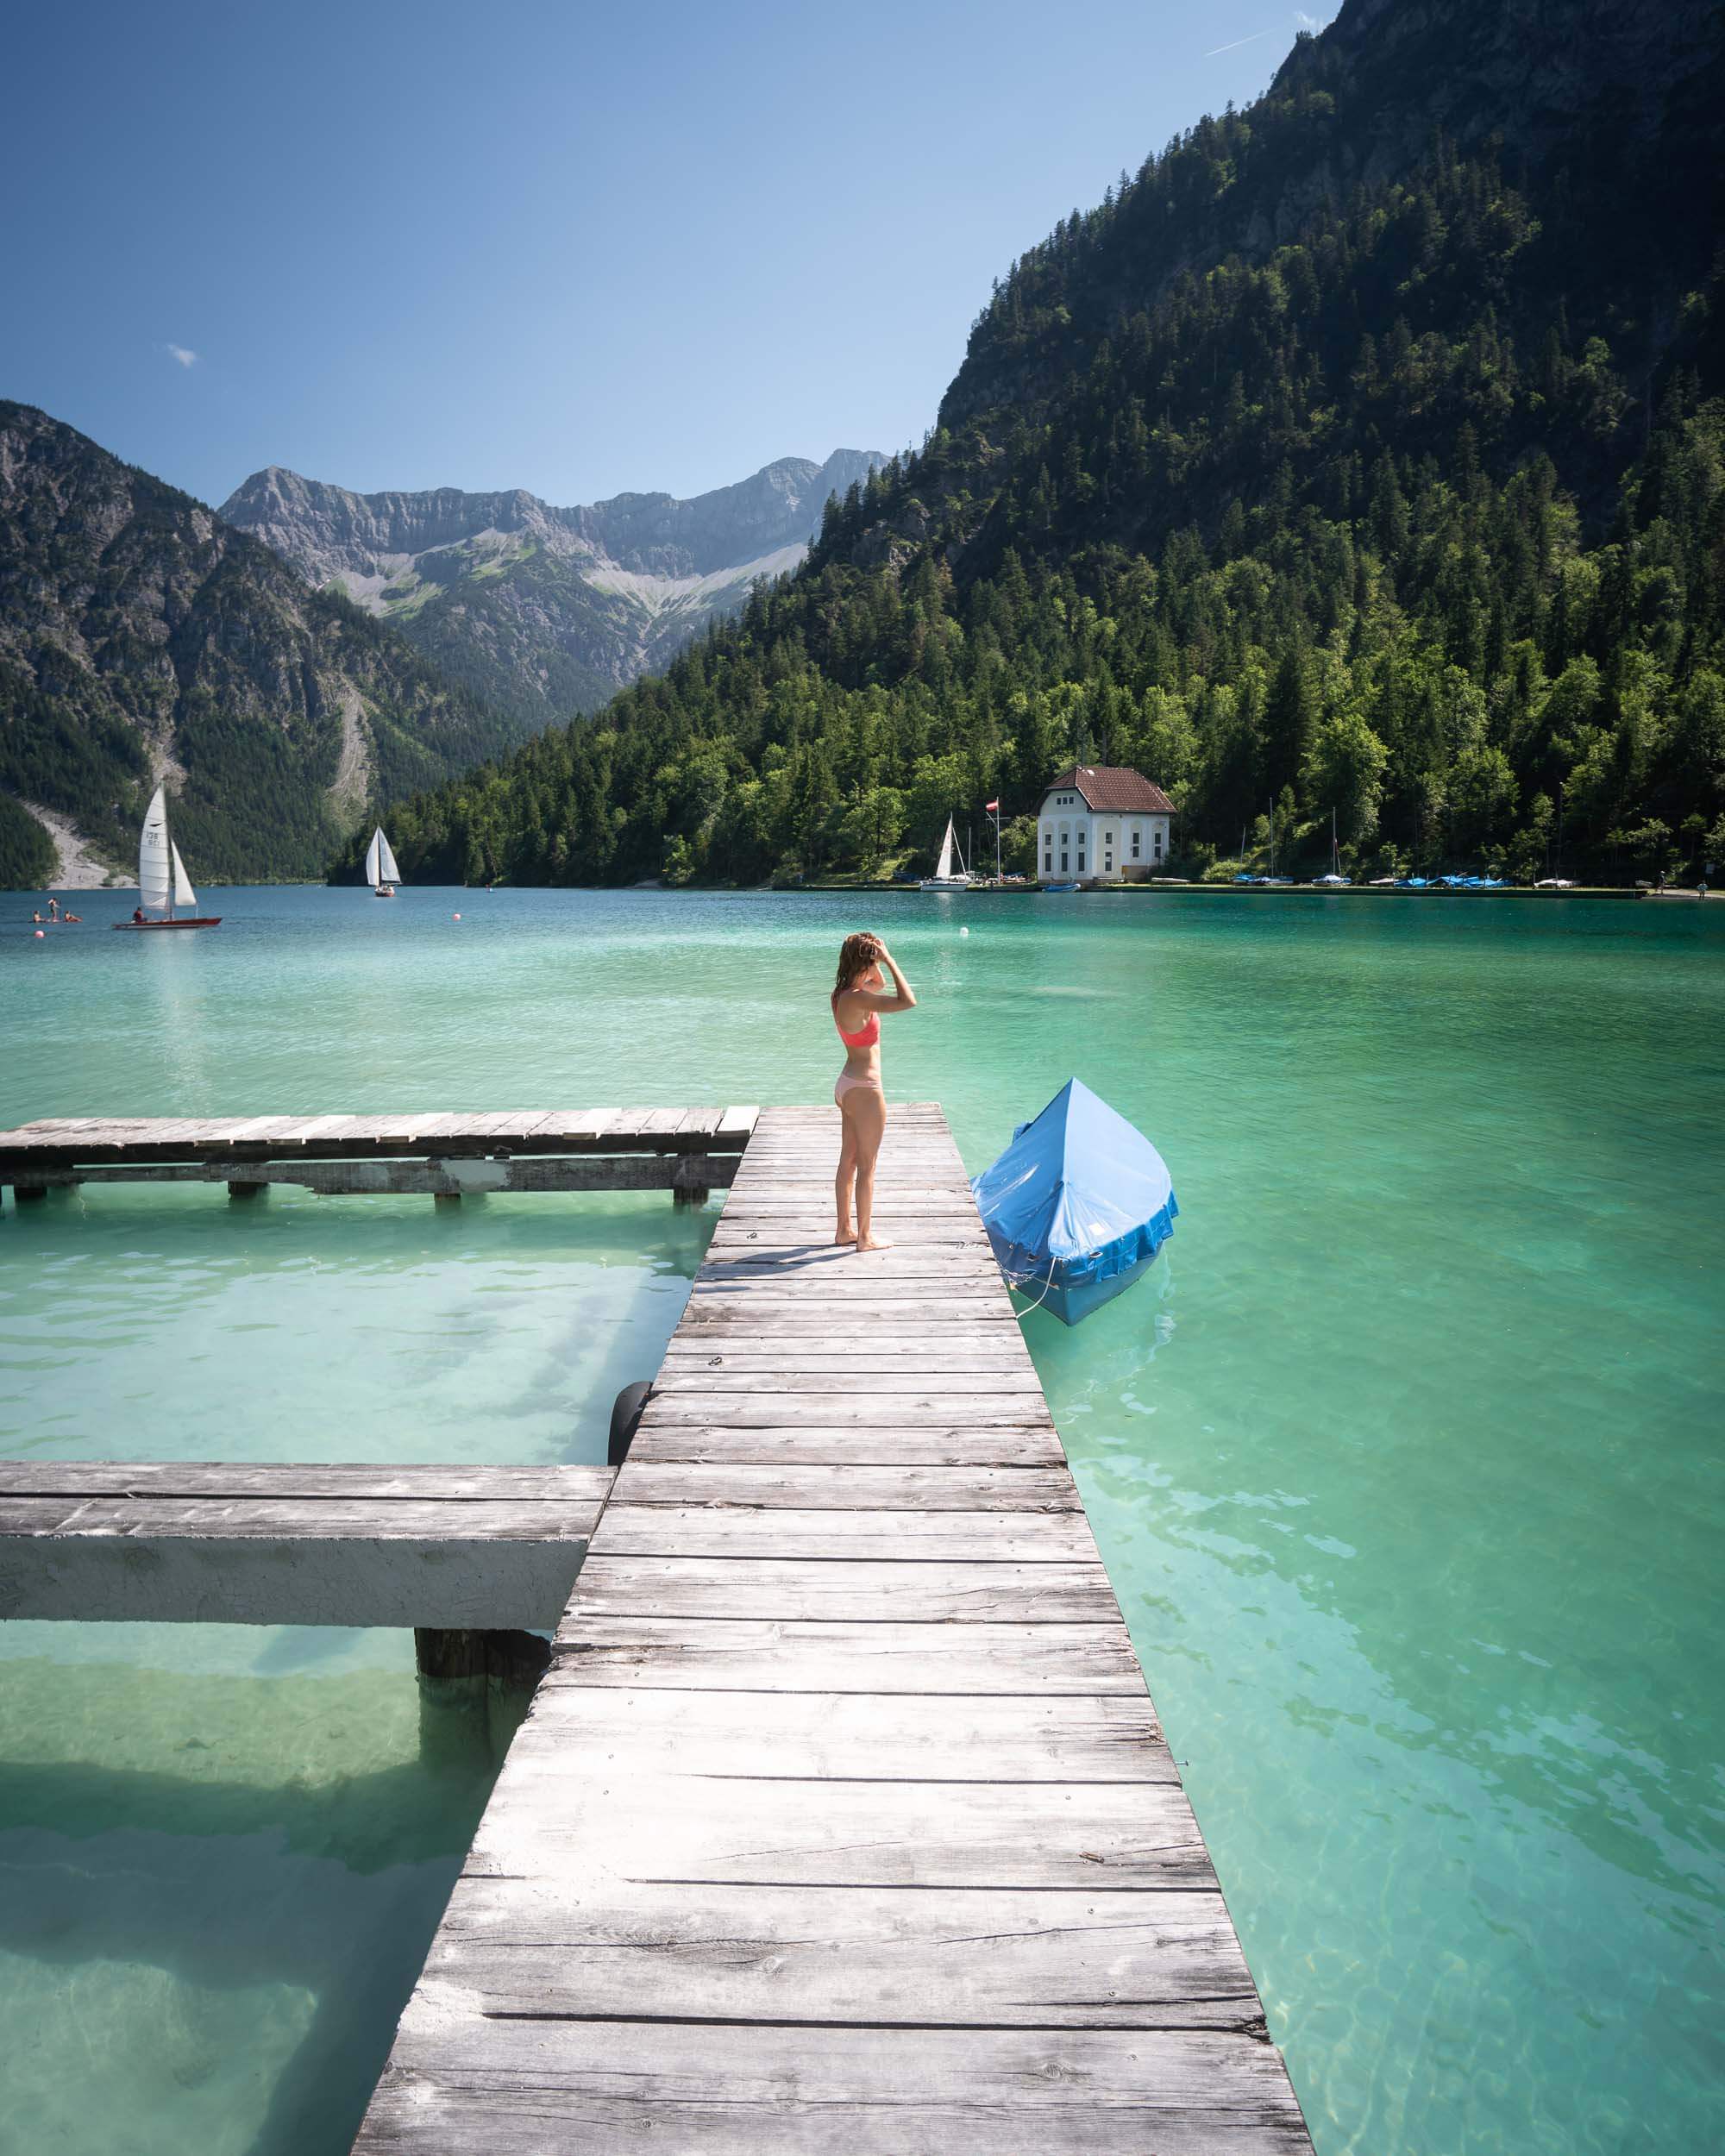 The water at Plansee in Austria is unbelievable! Get there early if you want to avoid the crowds on a nice day.